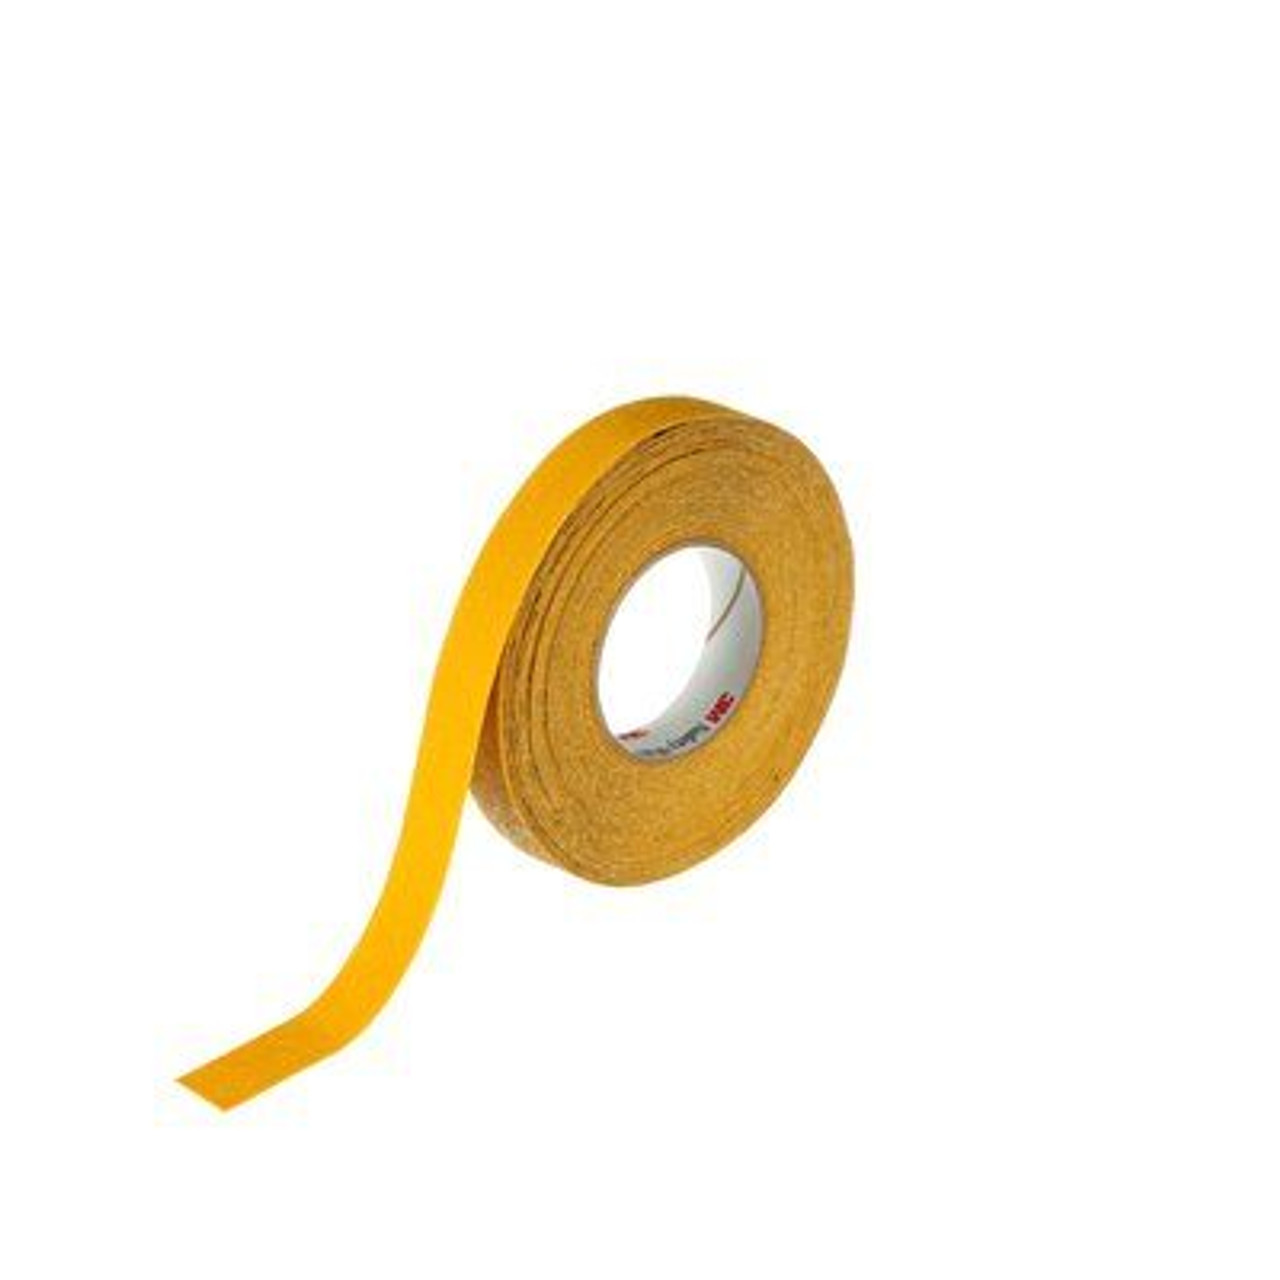 3M™ Safety-Walk™ Slip-Resistant General Purpose Tapes and Treads 630-B, Safety Yellow, 1 in x 60 ft, Roll, 4/Case